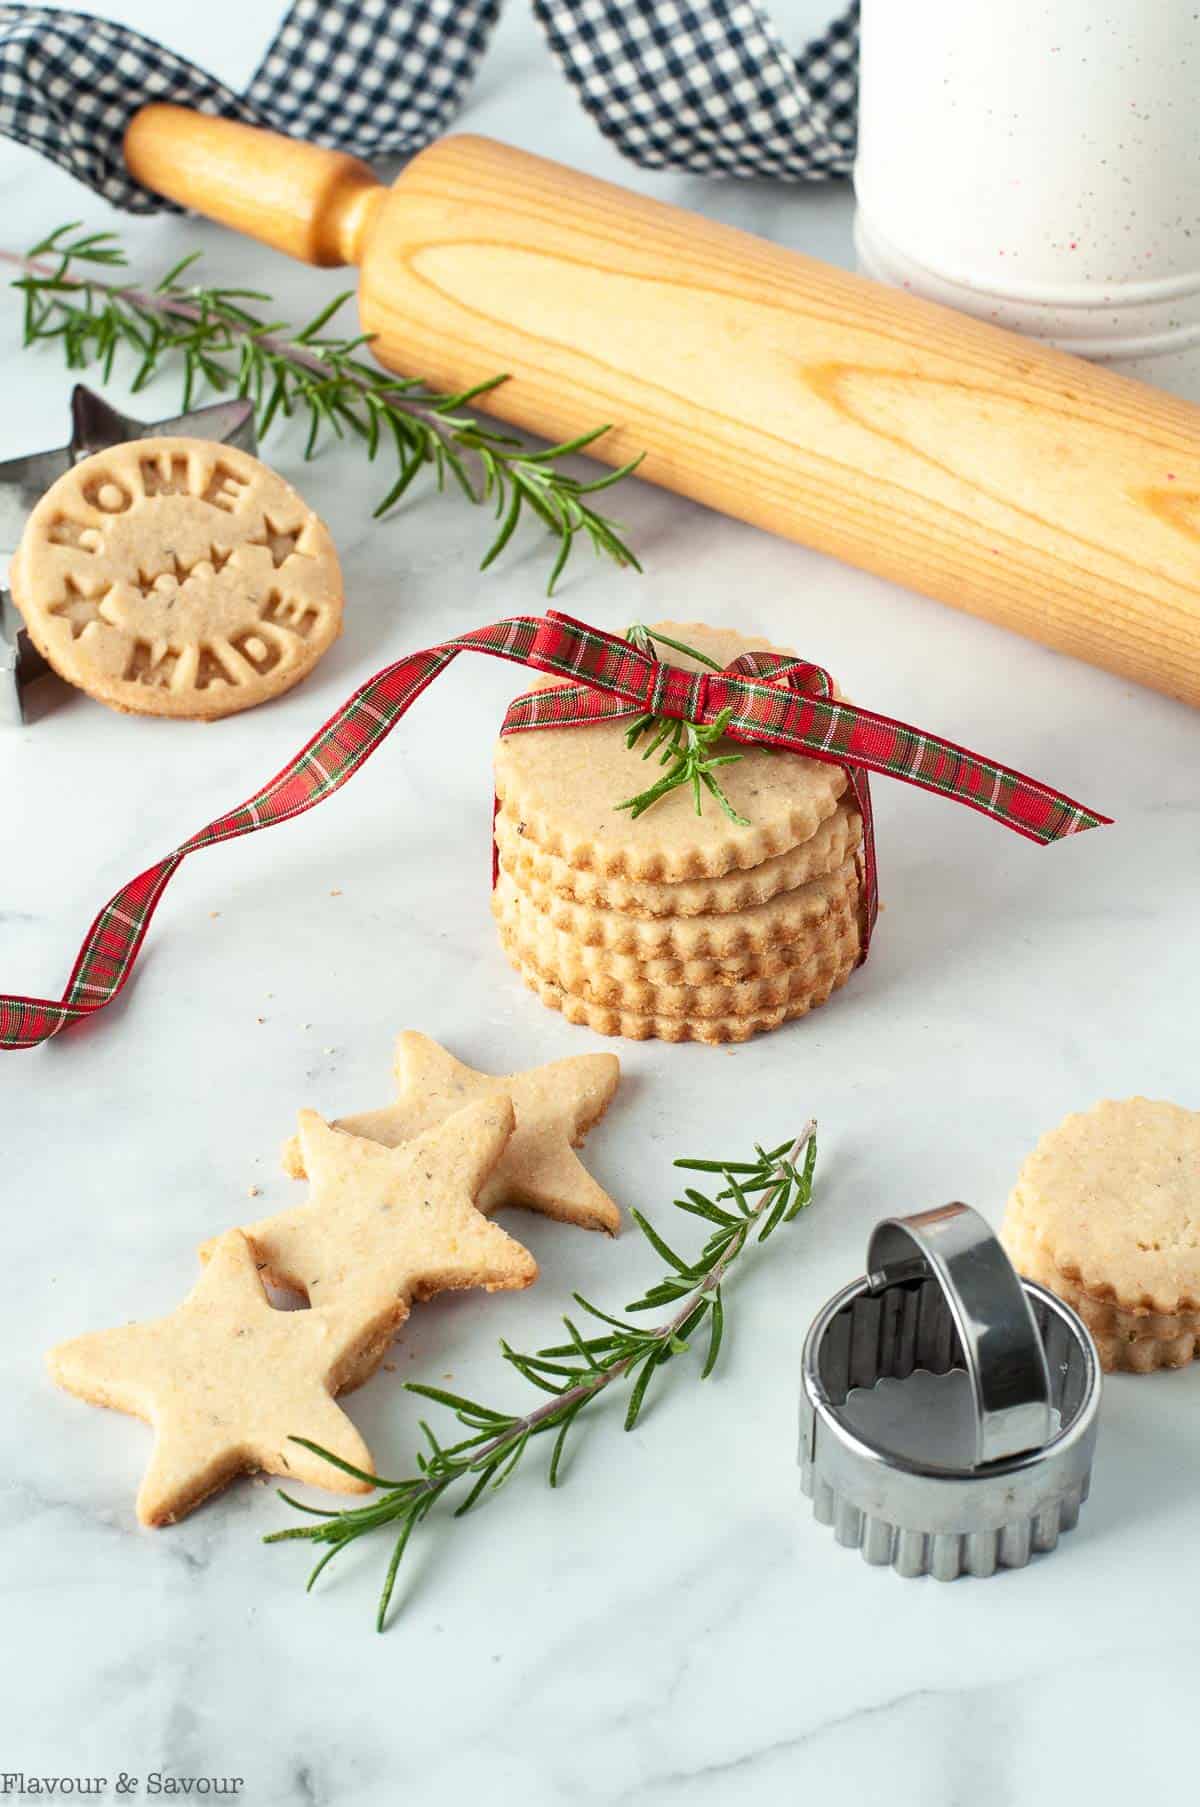 Rosemary shortbread cookies tied with a ribbon.